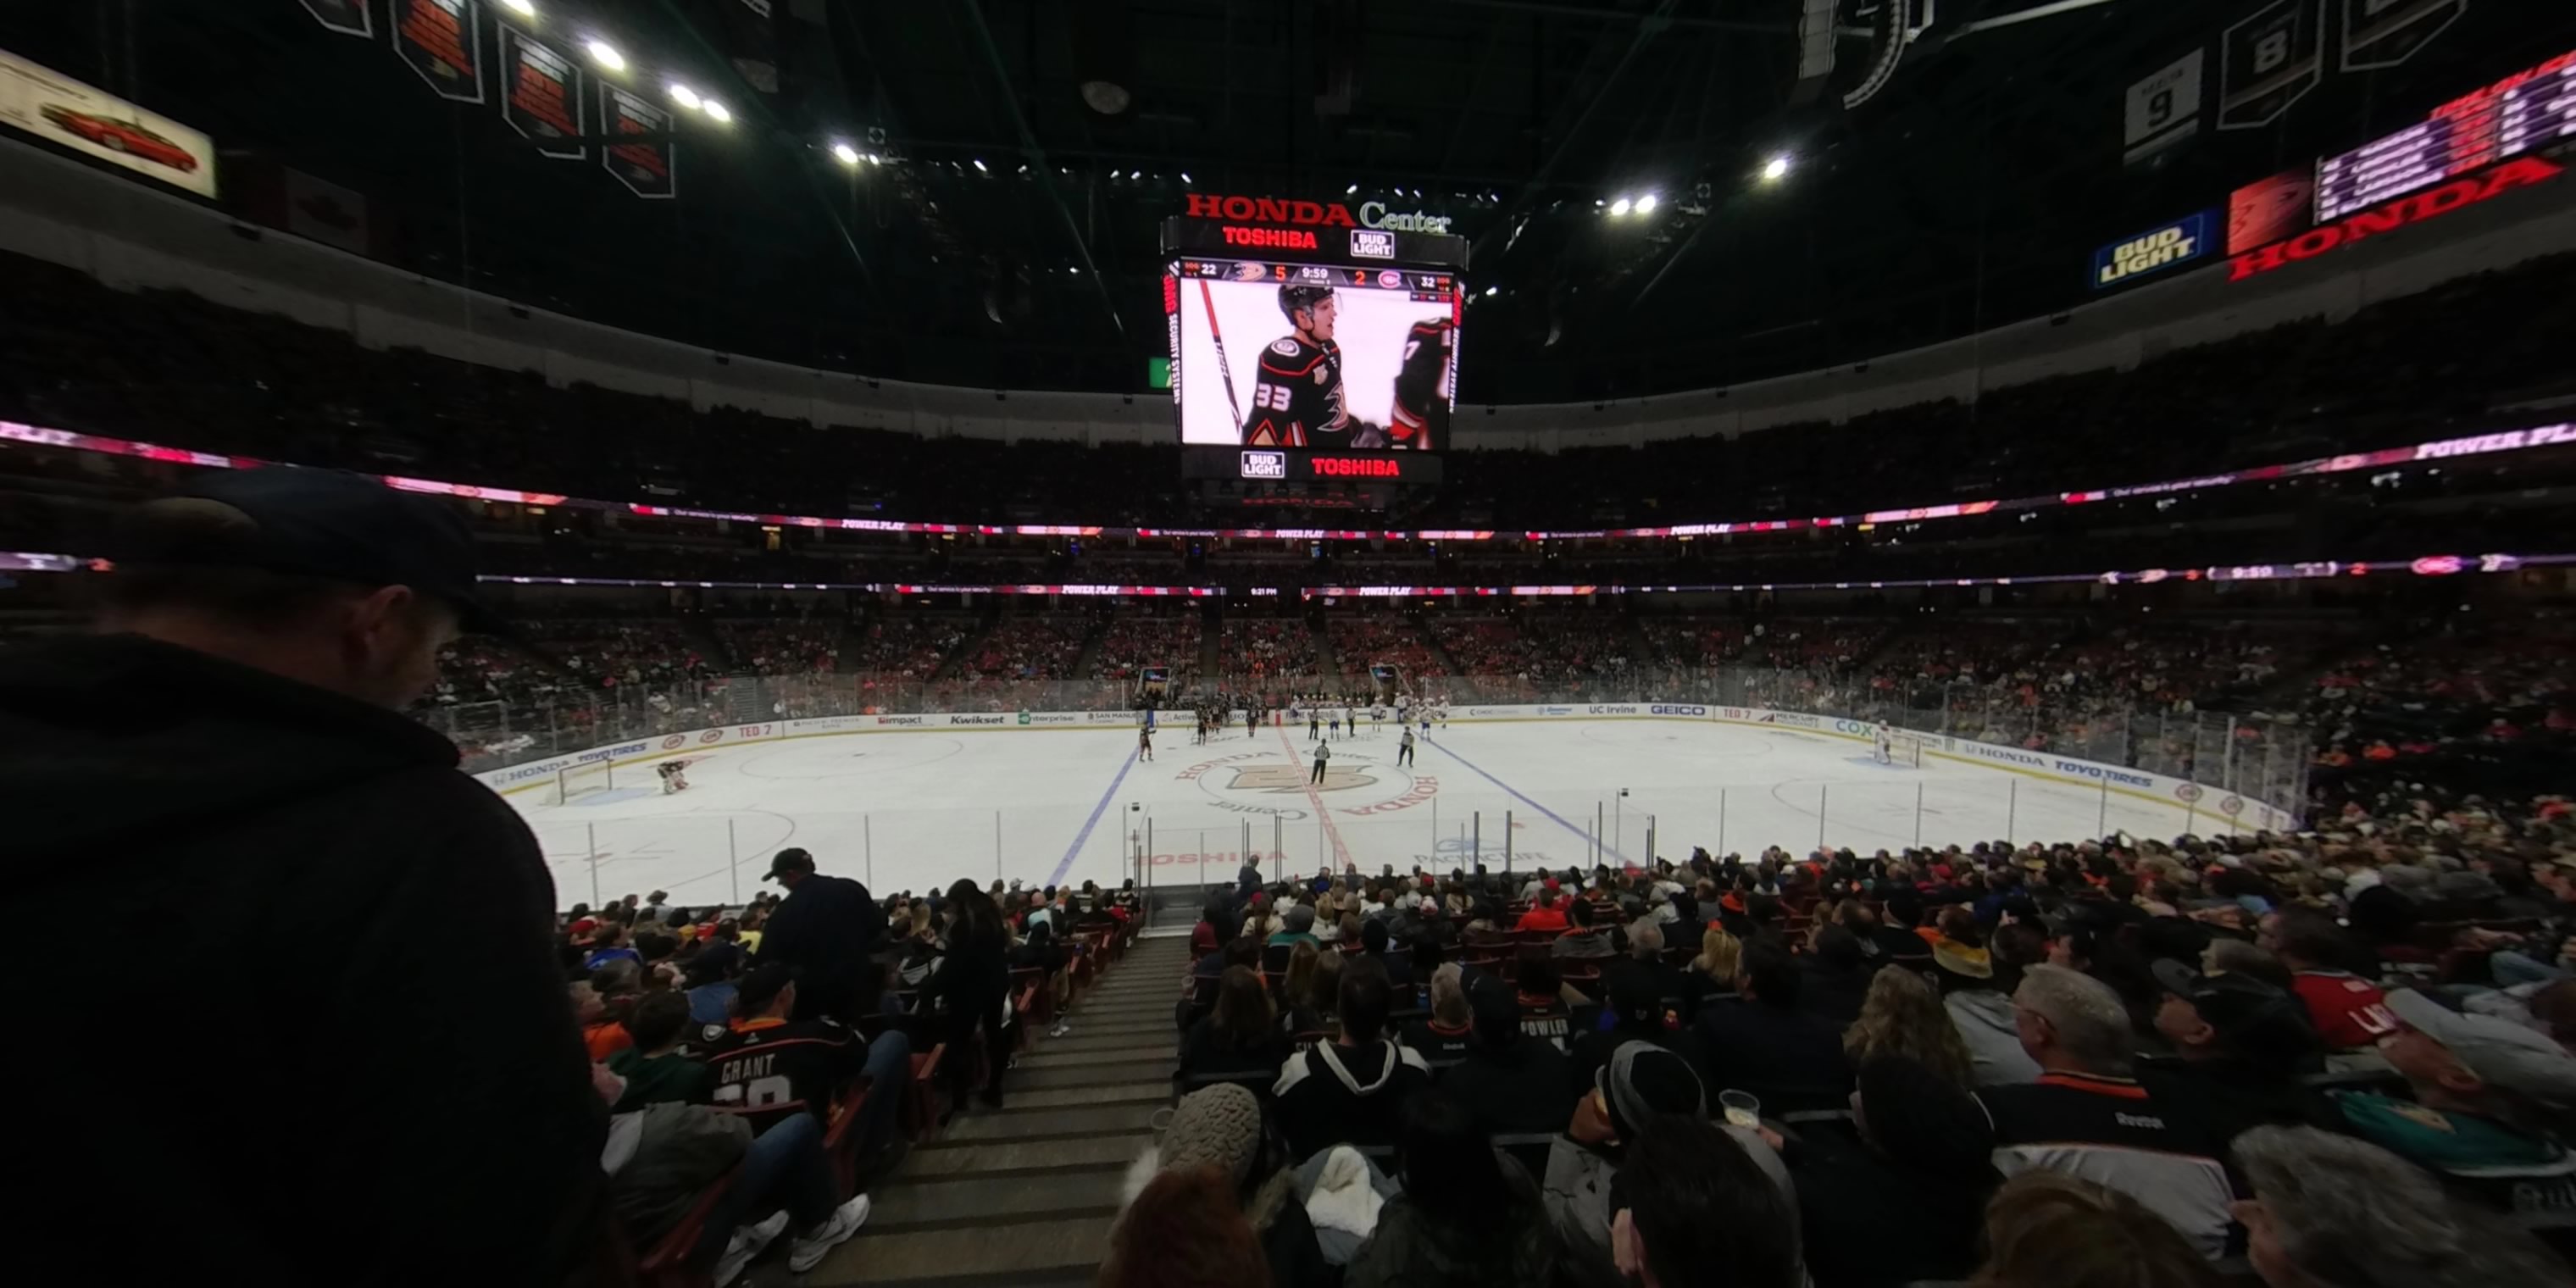 section 222 panoramic seat view  for hockey - honda center